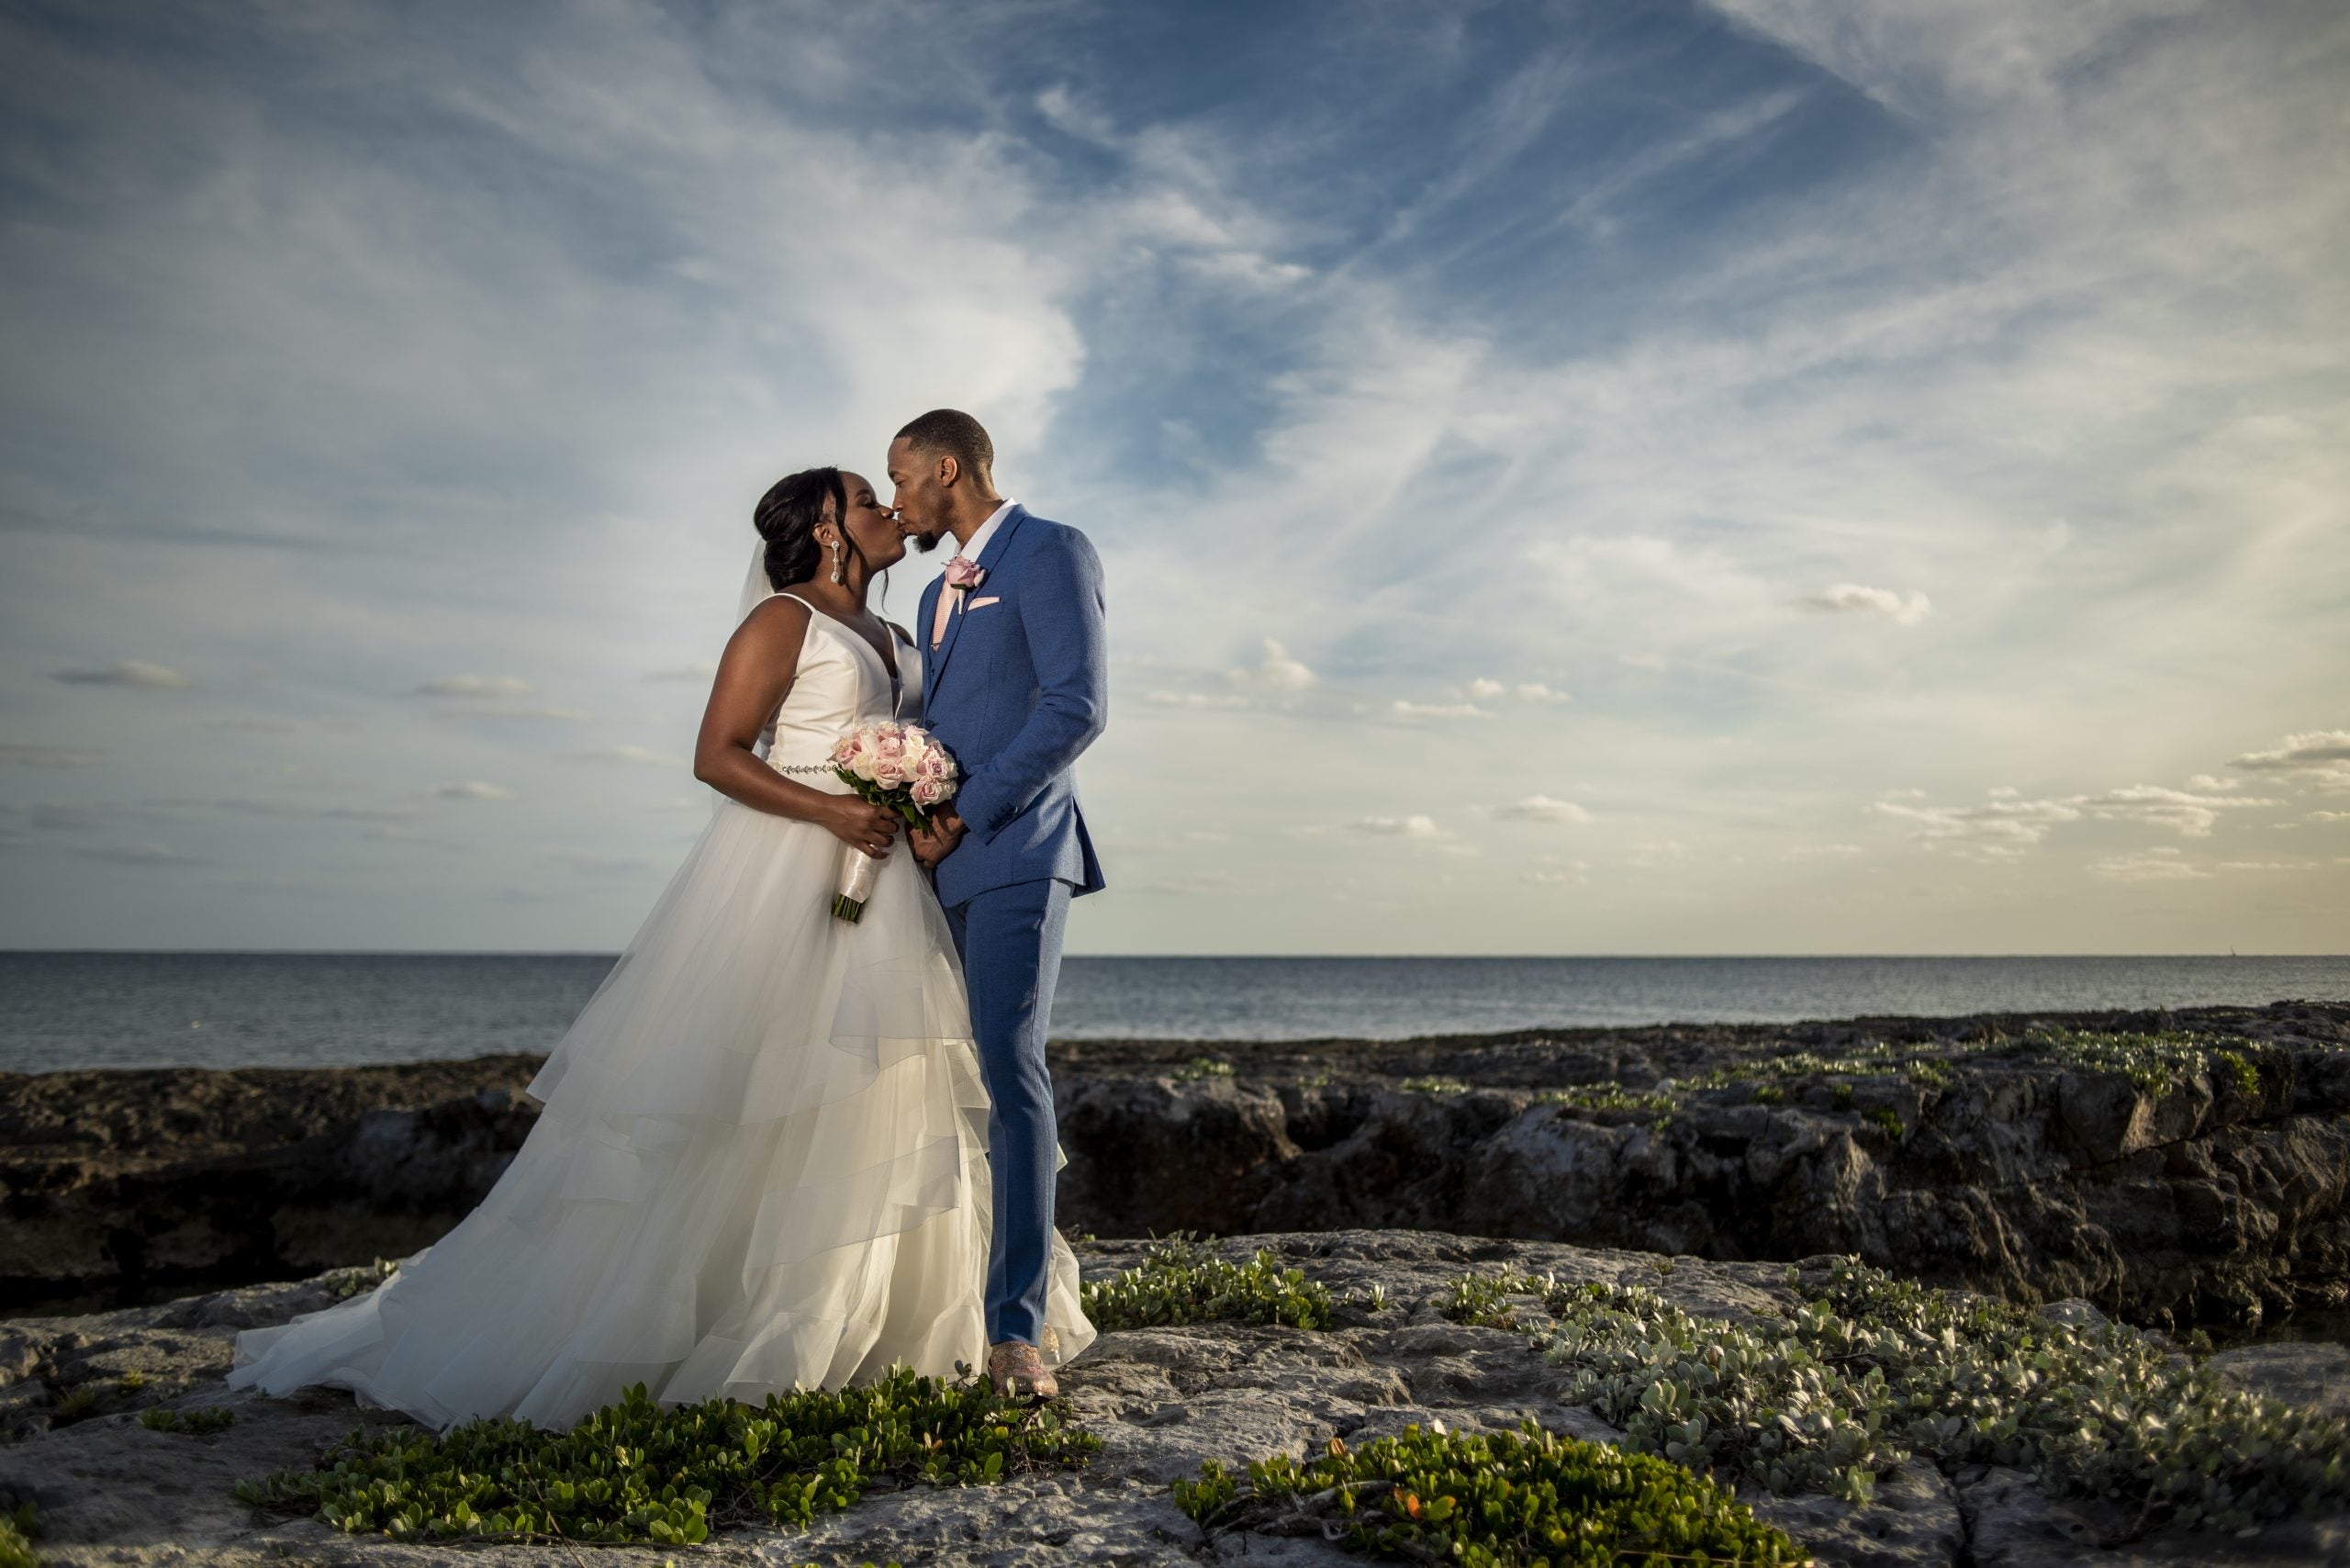 Bridal Bliss: Courtney And Michael Pulled Off A Stunning Destination Wedding With An Ocean Side Ceremony In Mexico